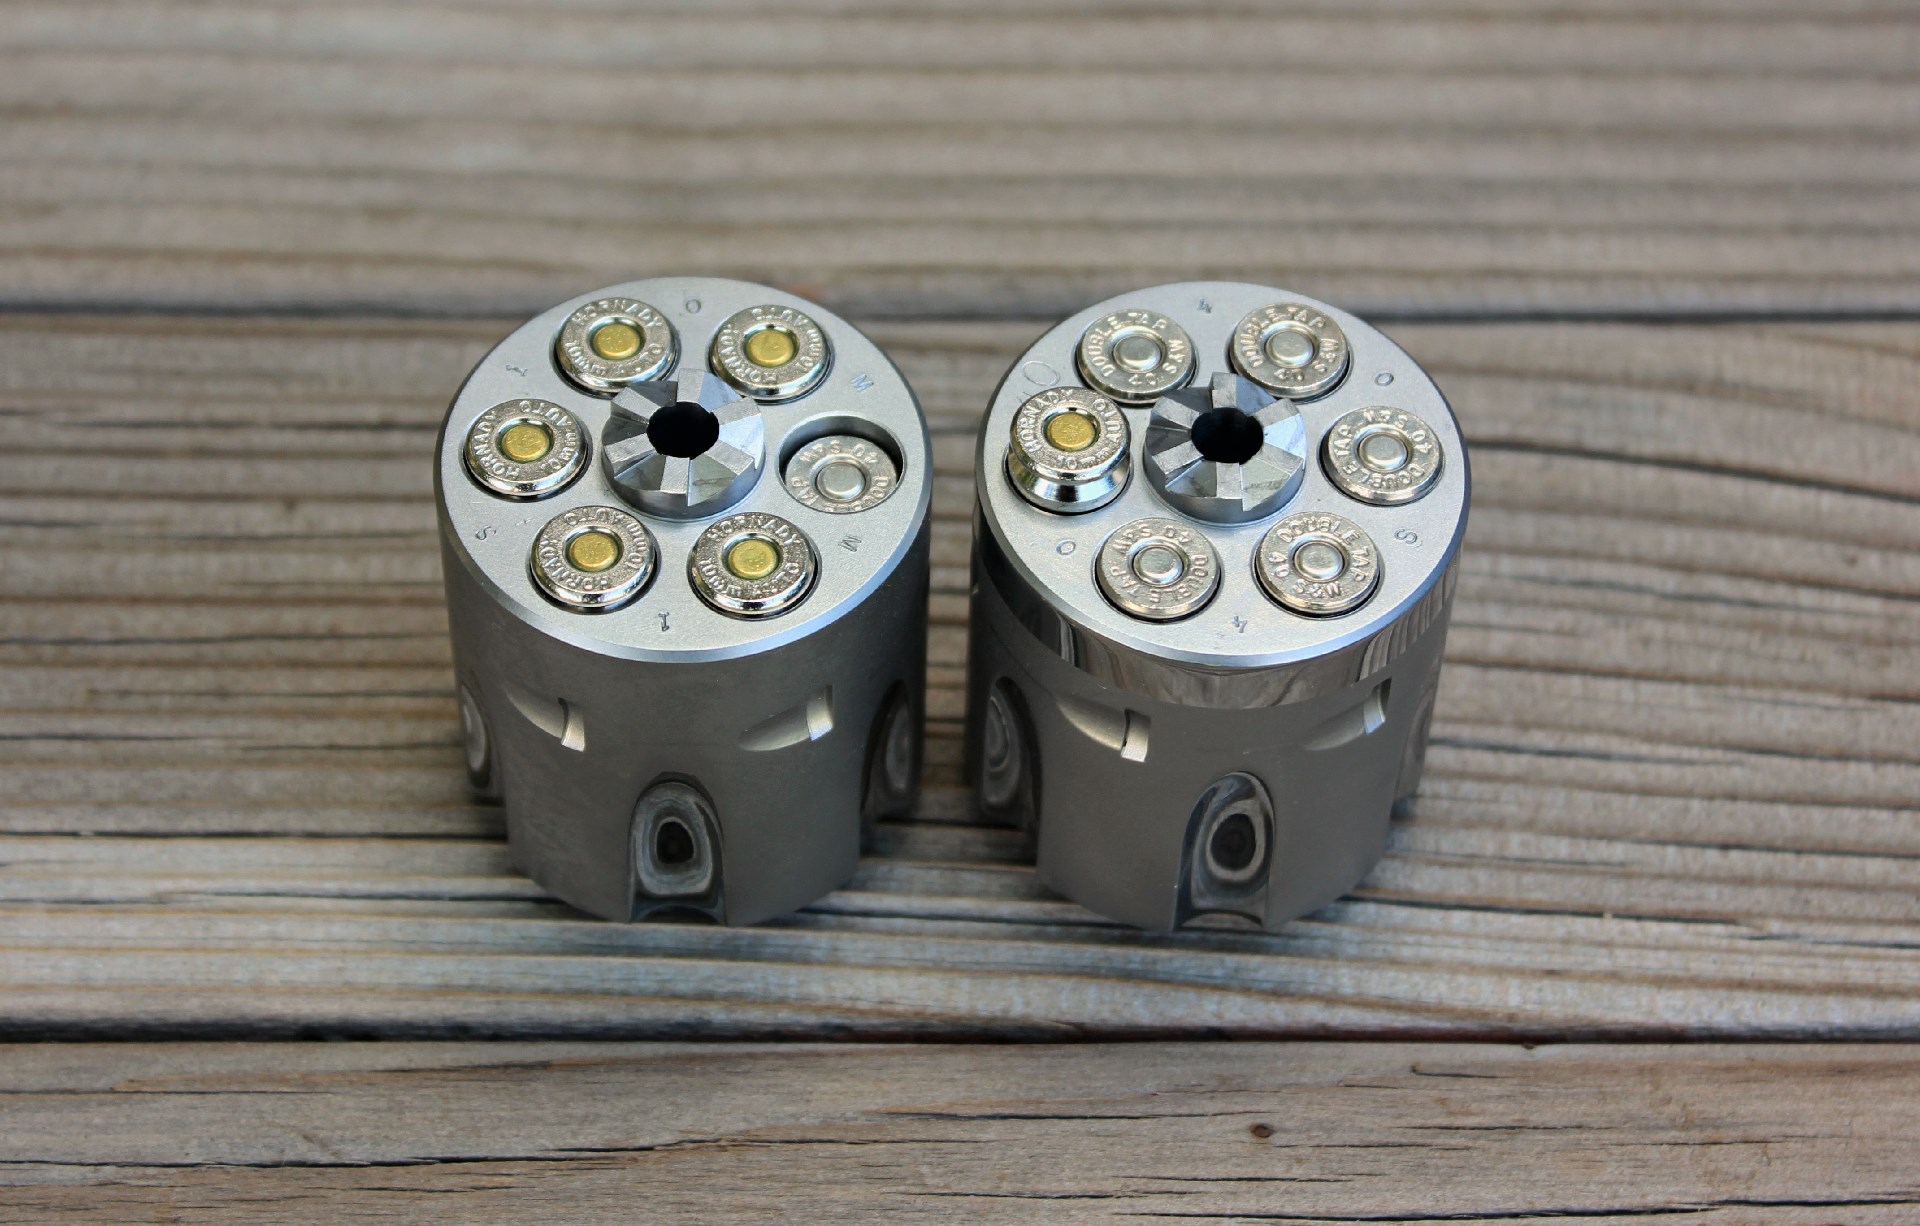 The .40 S&W's .850" long cartridge case gets swallowed up in the 10 mm cylinder (Left) while the .992" case of the 10 mm protrudes too far from the .40 S&W  chambered cylinder (Right).